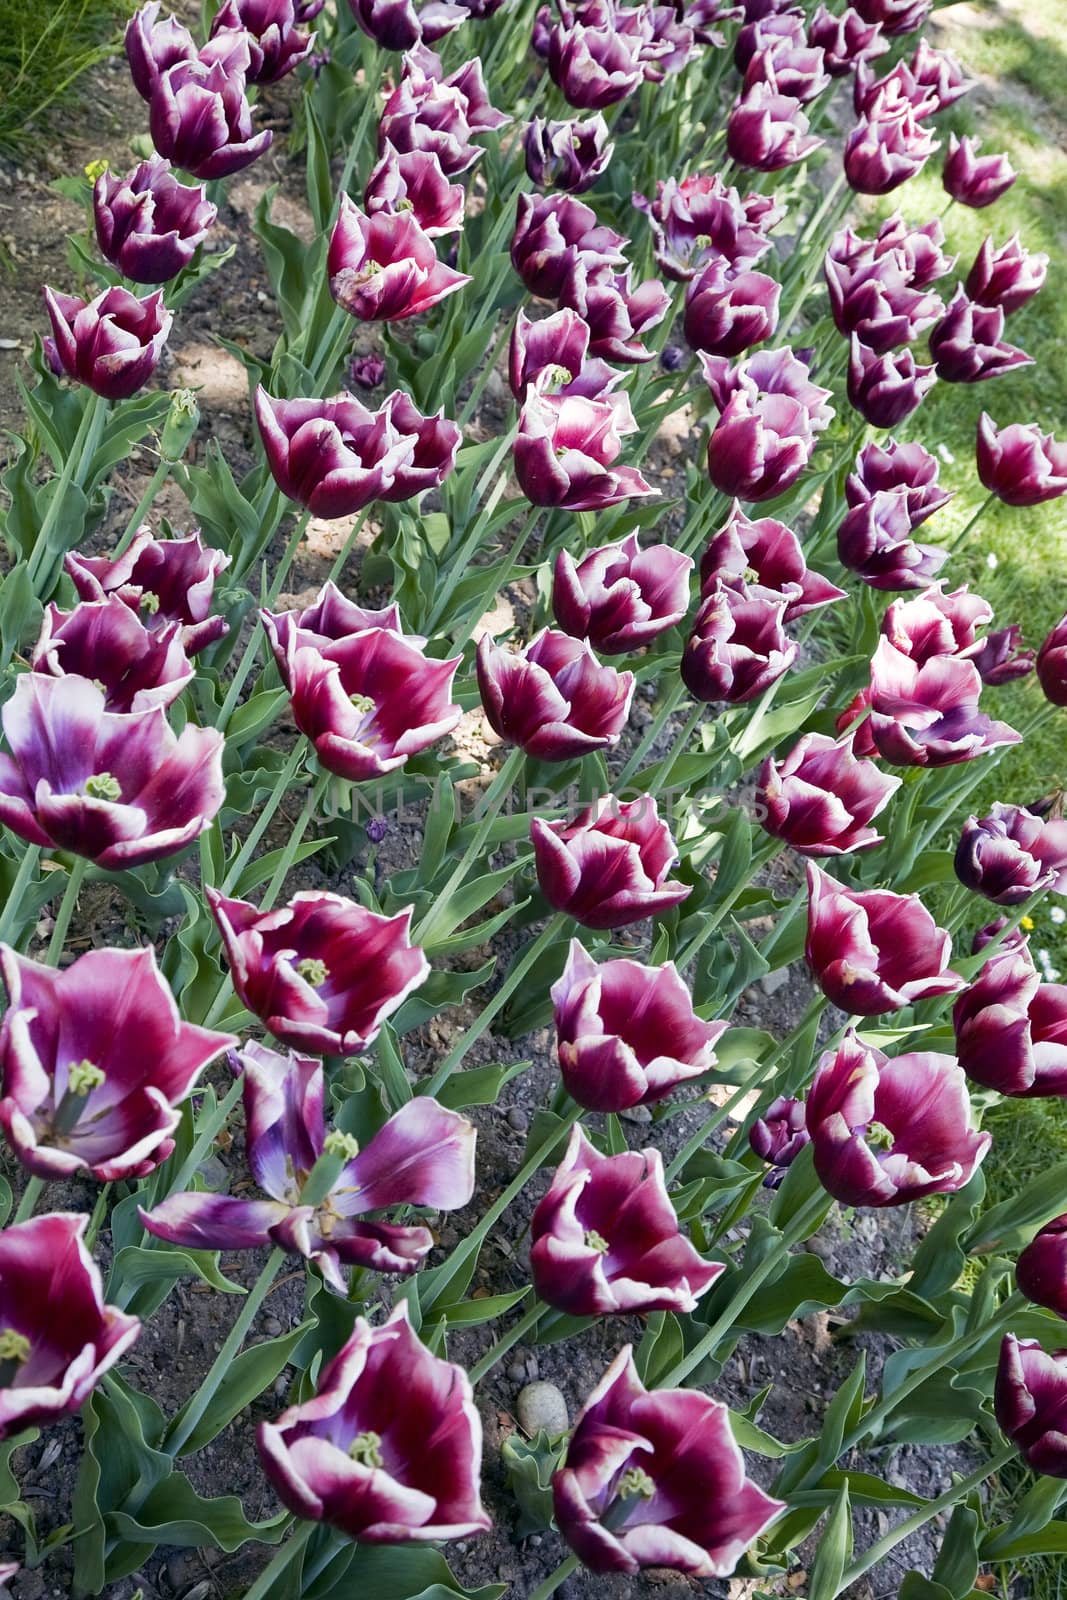 A bed of La Mancha tulips in a park.